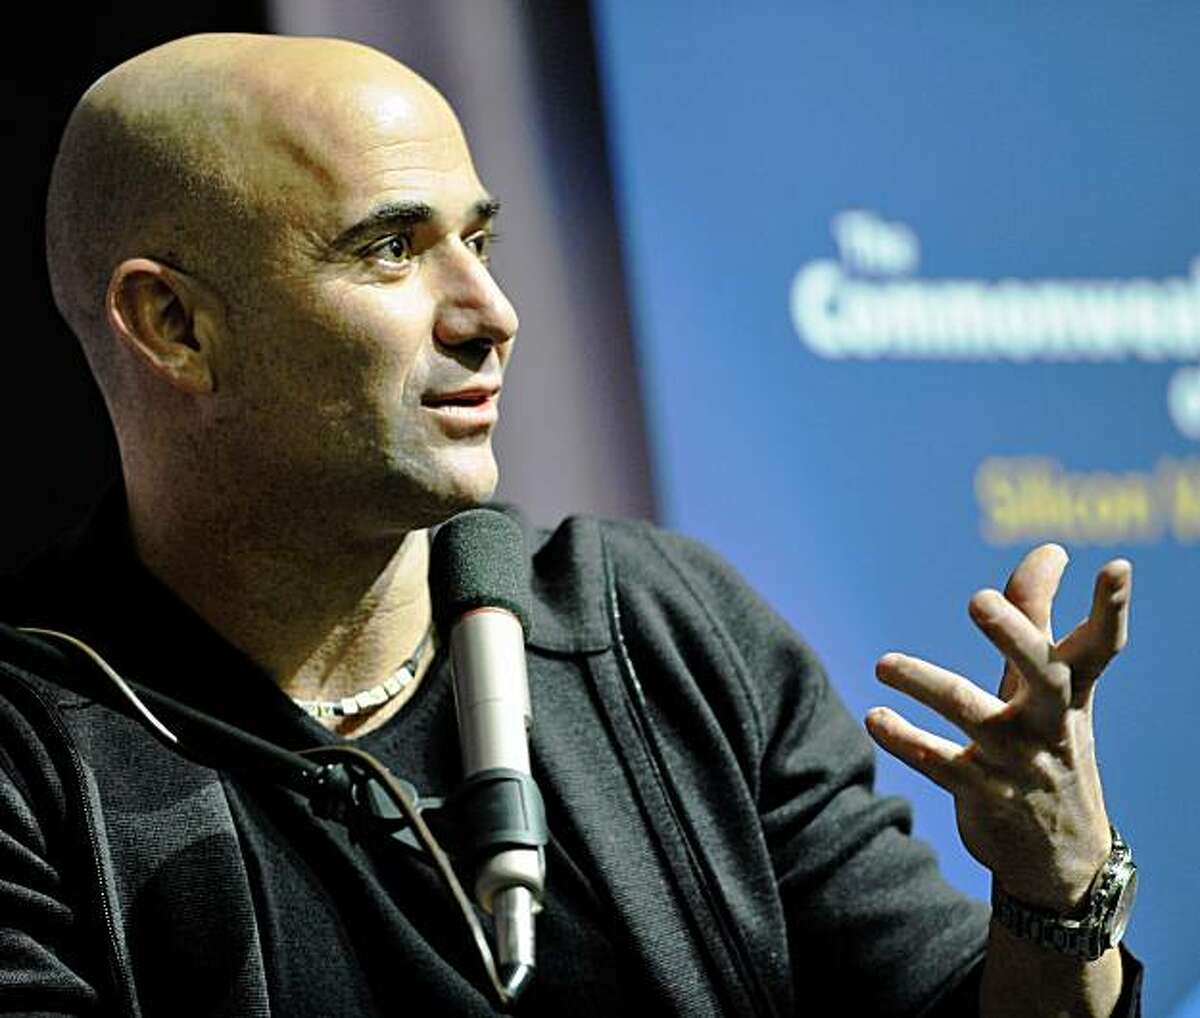 Retired tennis player Andre Agassi discusses his new autobiography "Open" at the Oshman Jewish Community Center in in Palo Alto, Calif., Friday Nov. 20, 2009. (AP Photo/Russel A. Daniels)